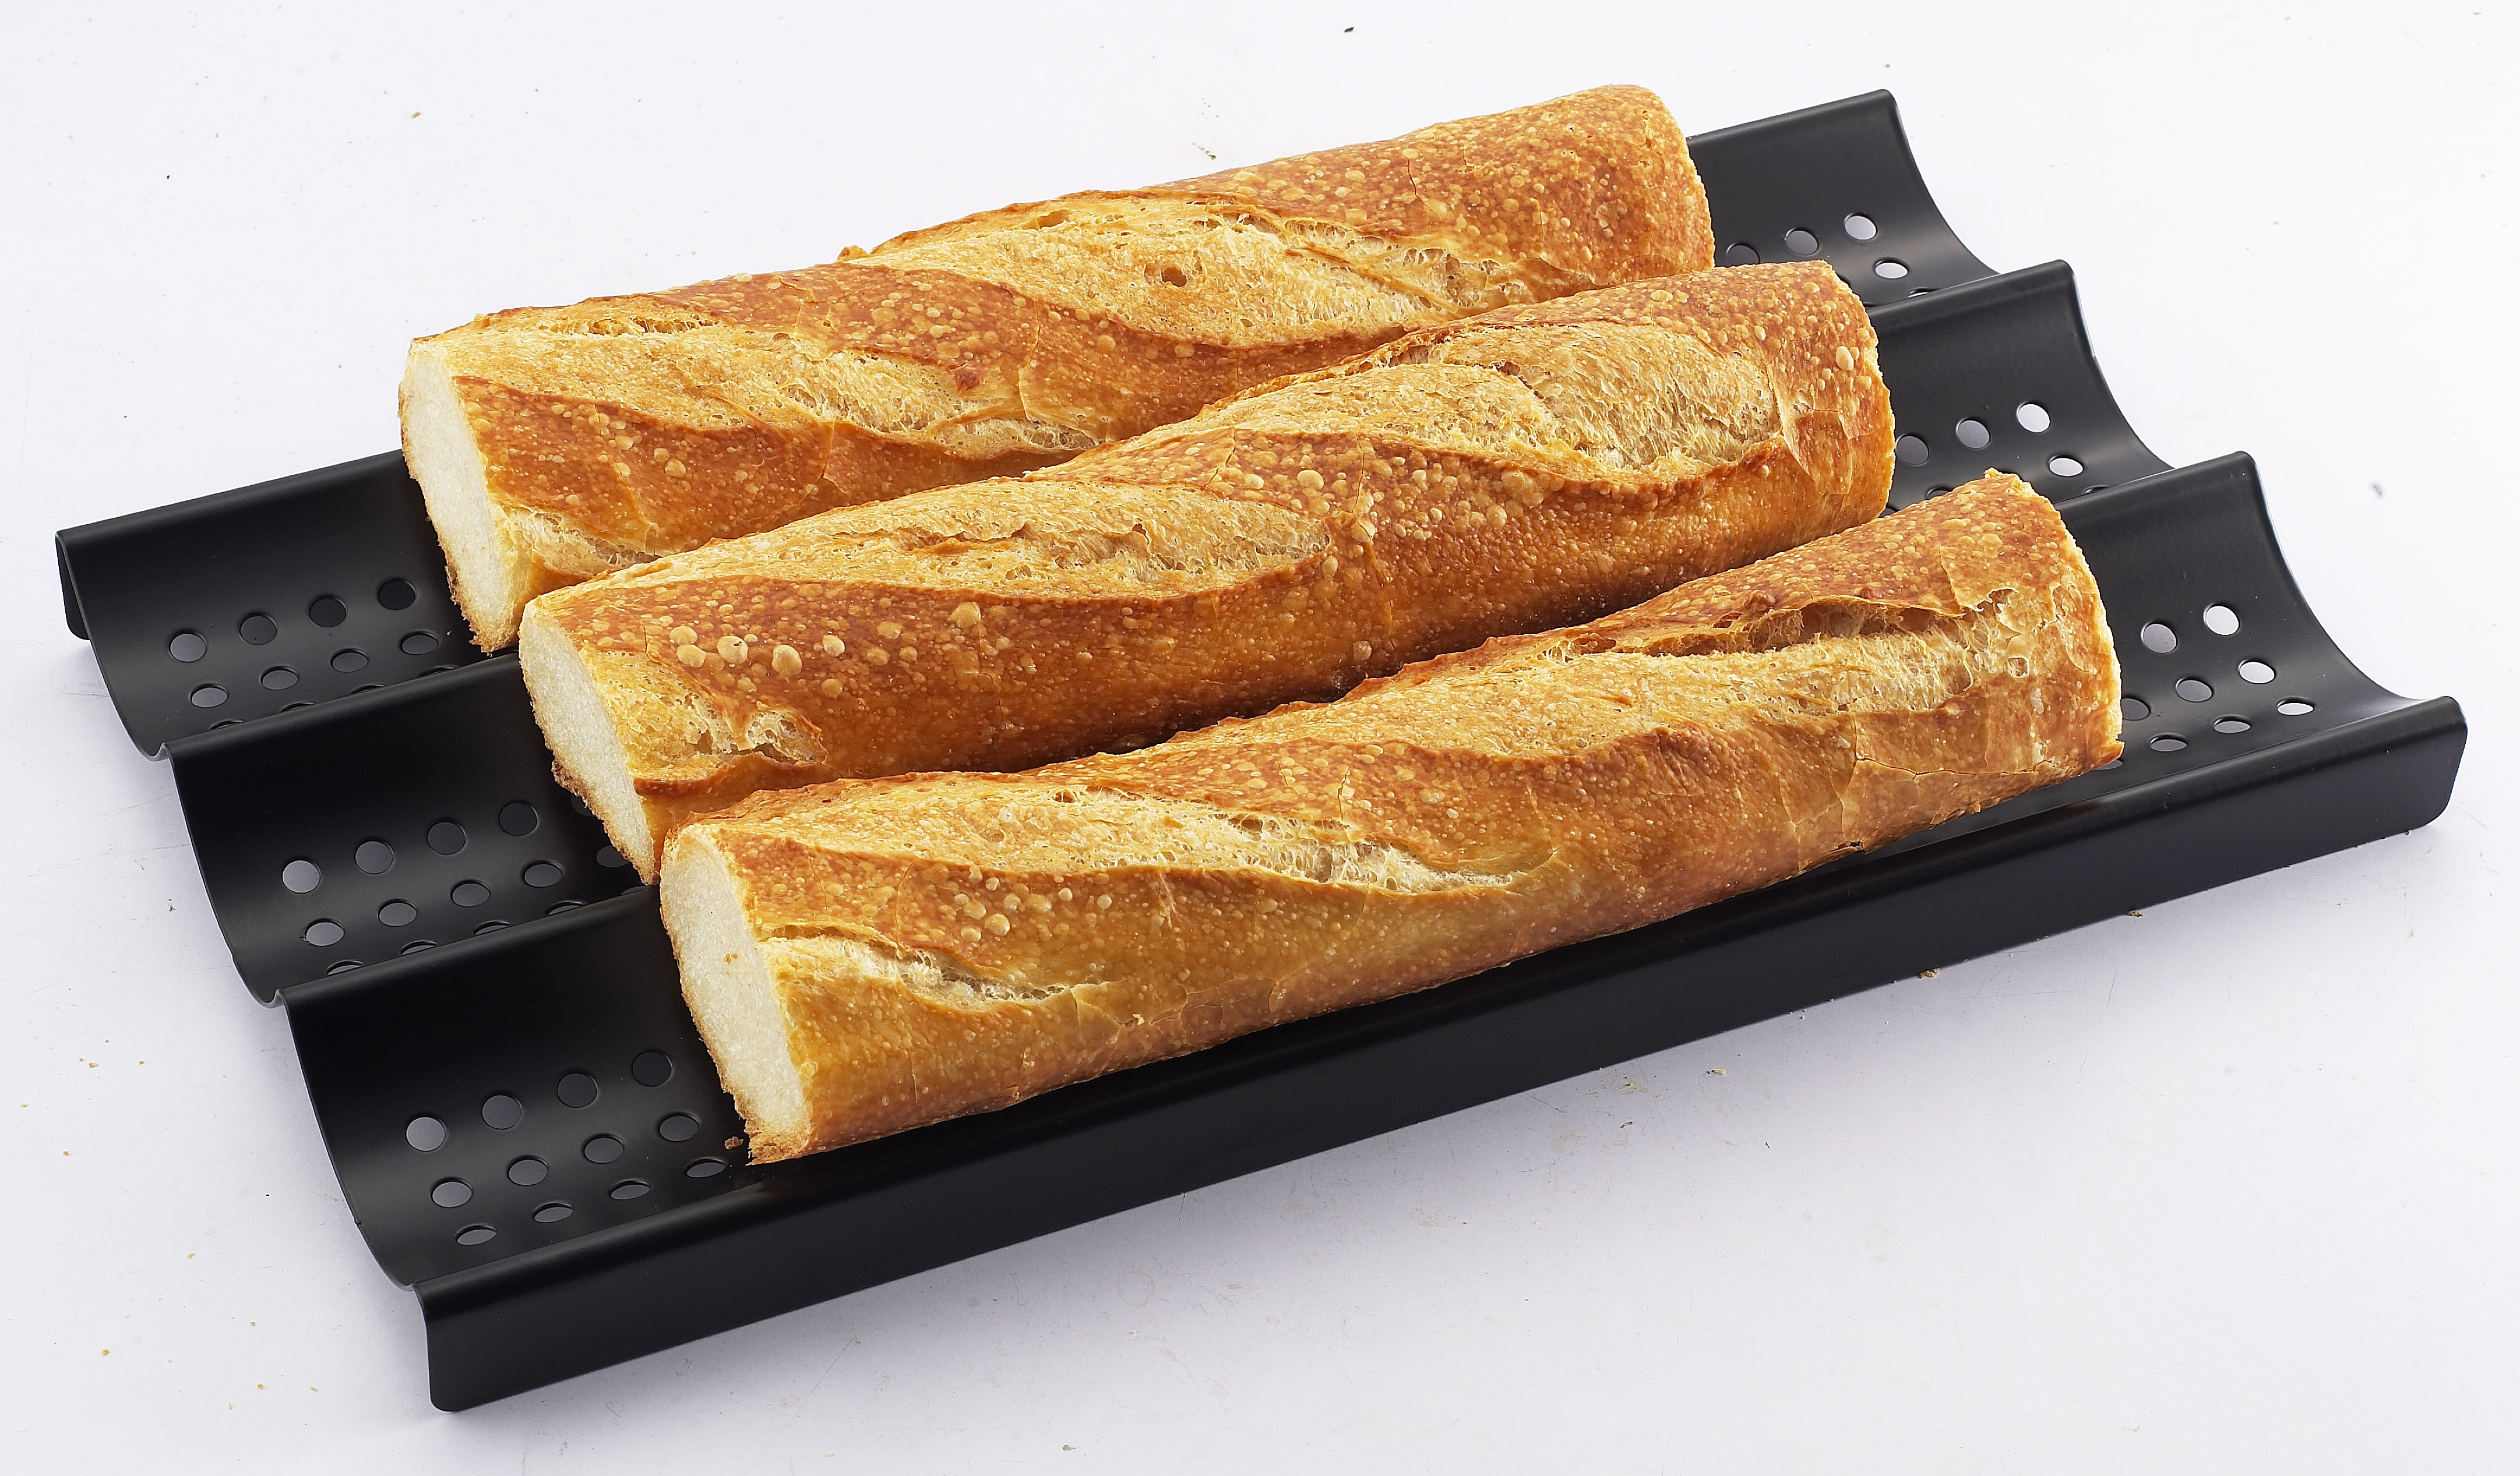 BBQ 870002 3-Loaf Perforated Baguette French Bread Pan, Nonstick, 16 by 9-Inches